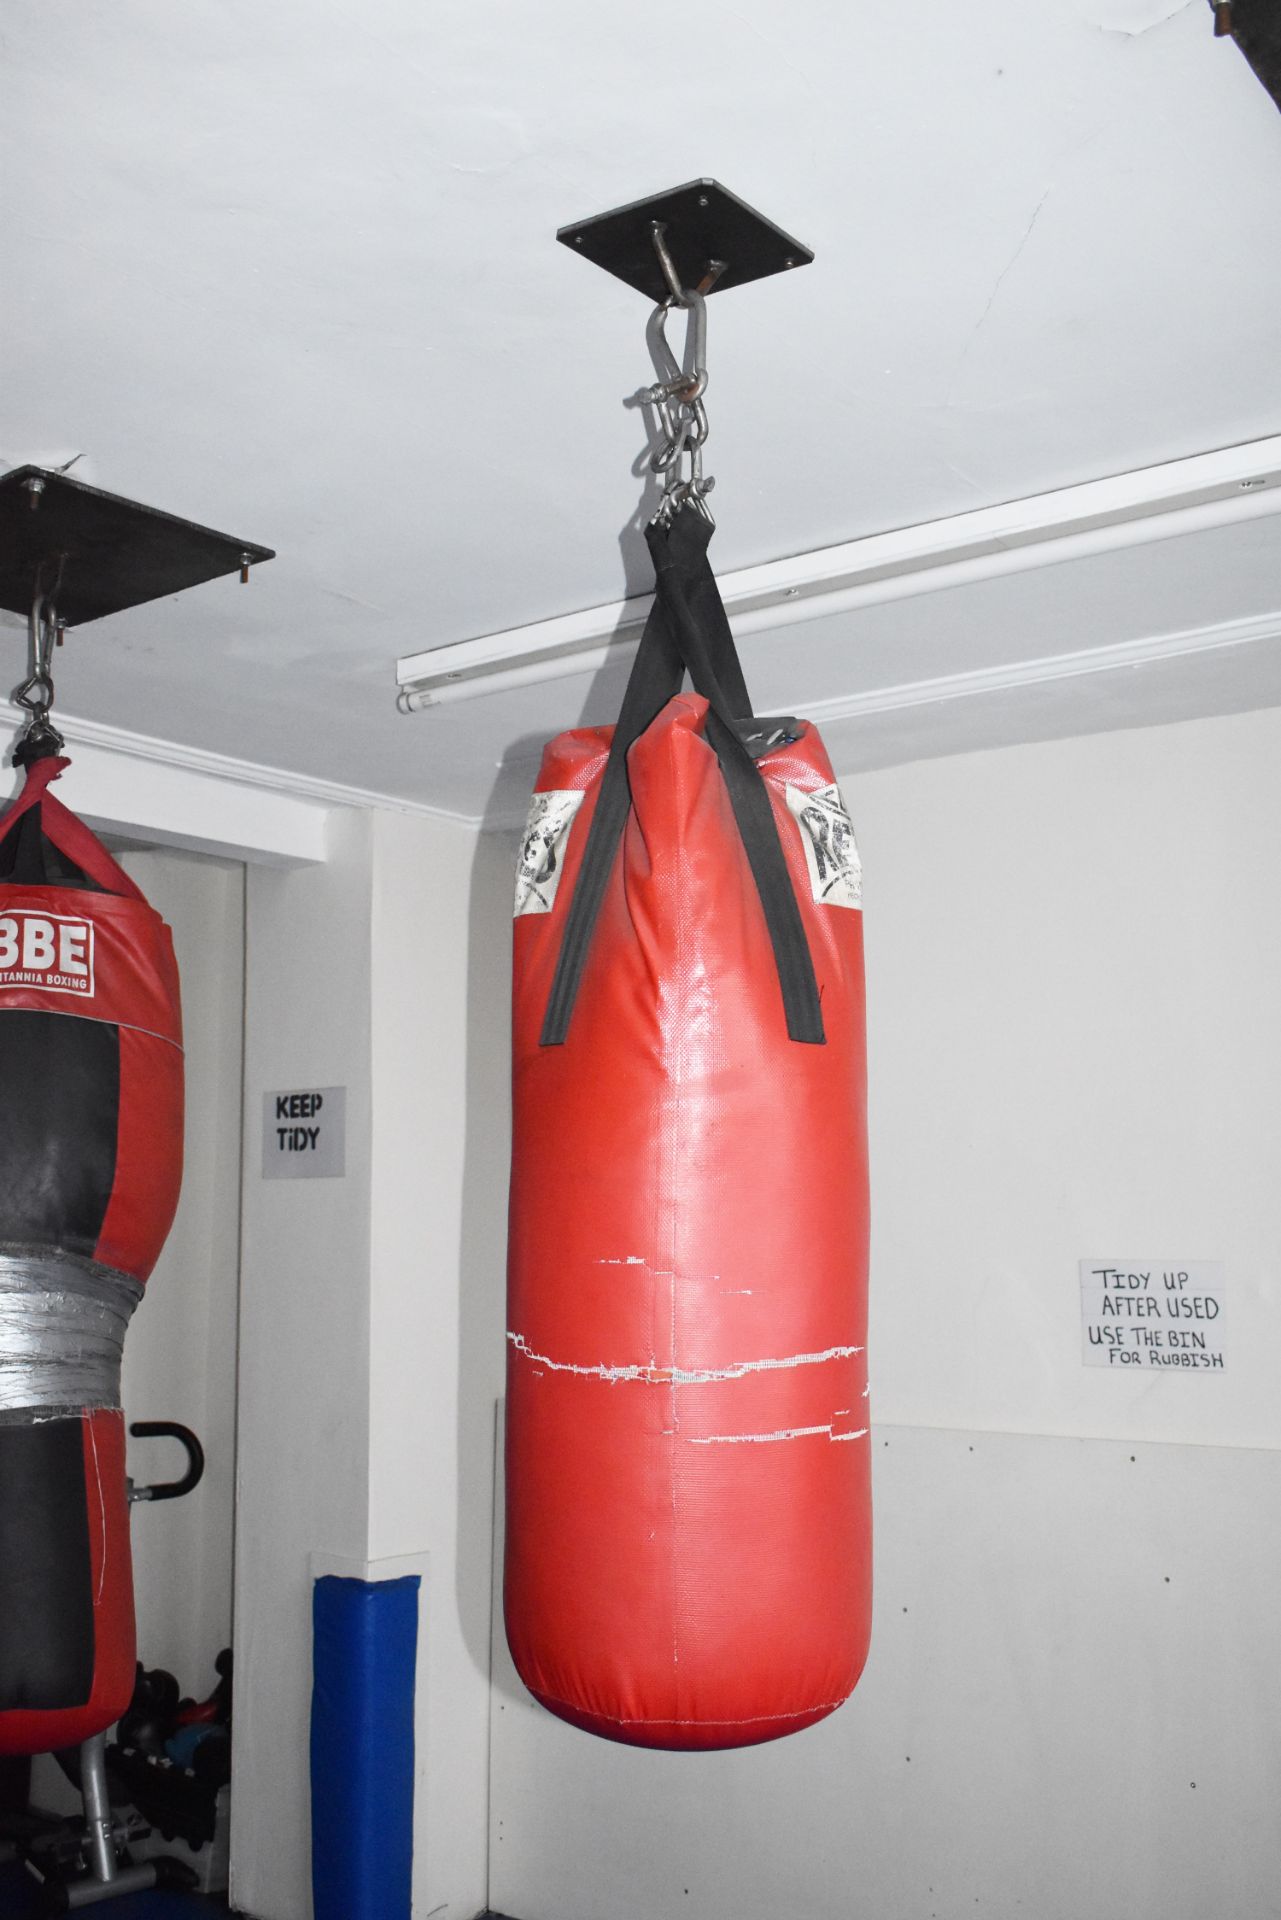 3 x Ceiling Mounted Punch Kick Bags Suitable For Boxing or Martial Arts etc - CL476 - Location: